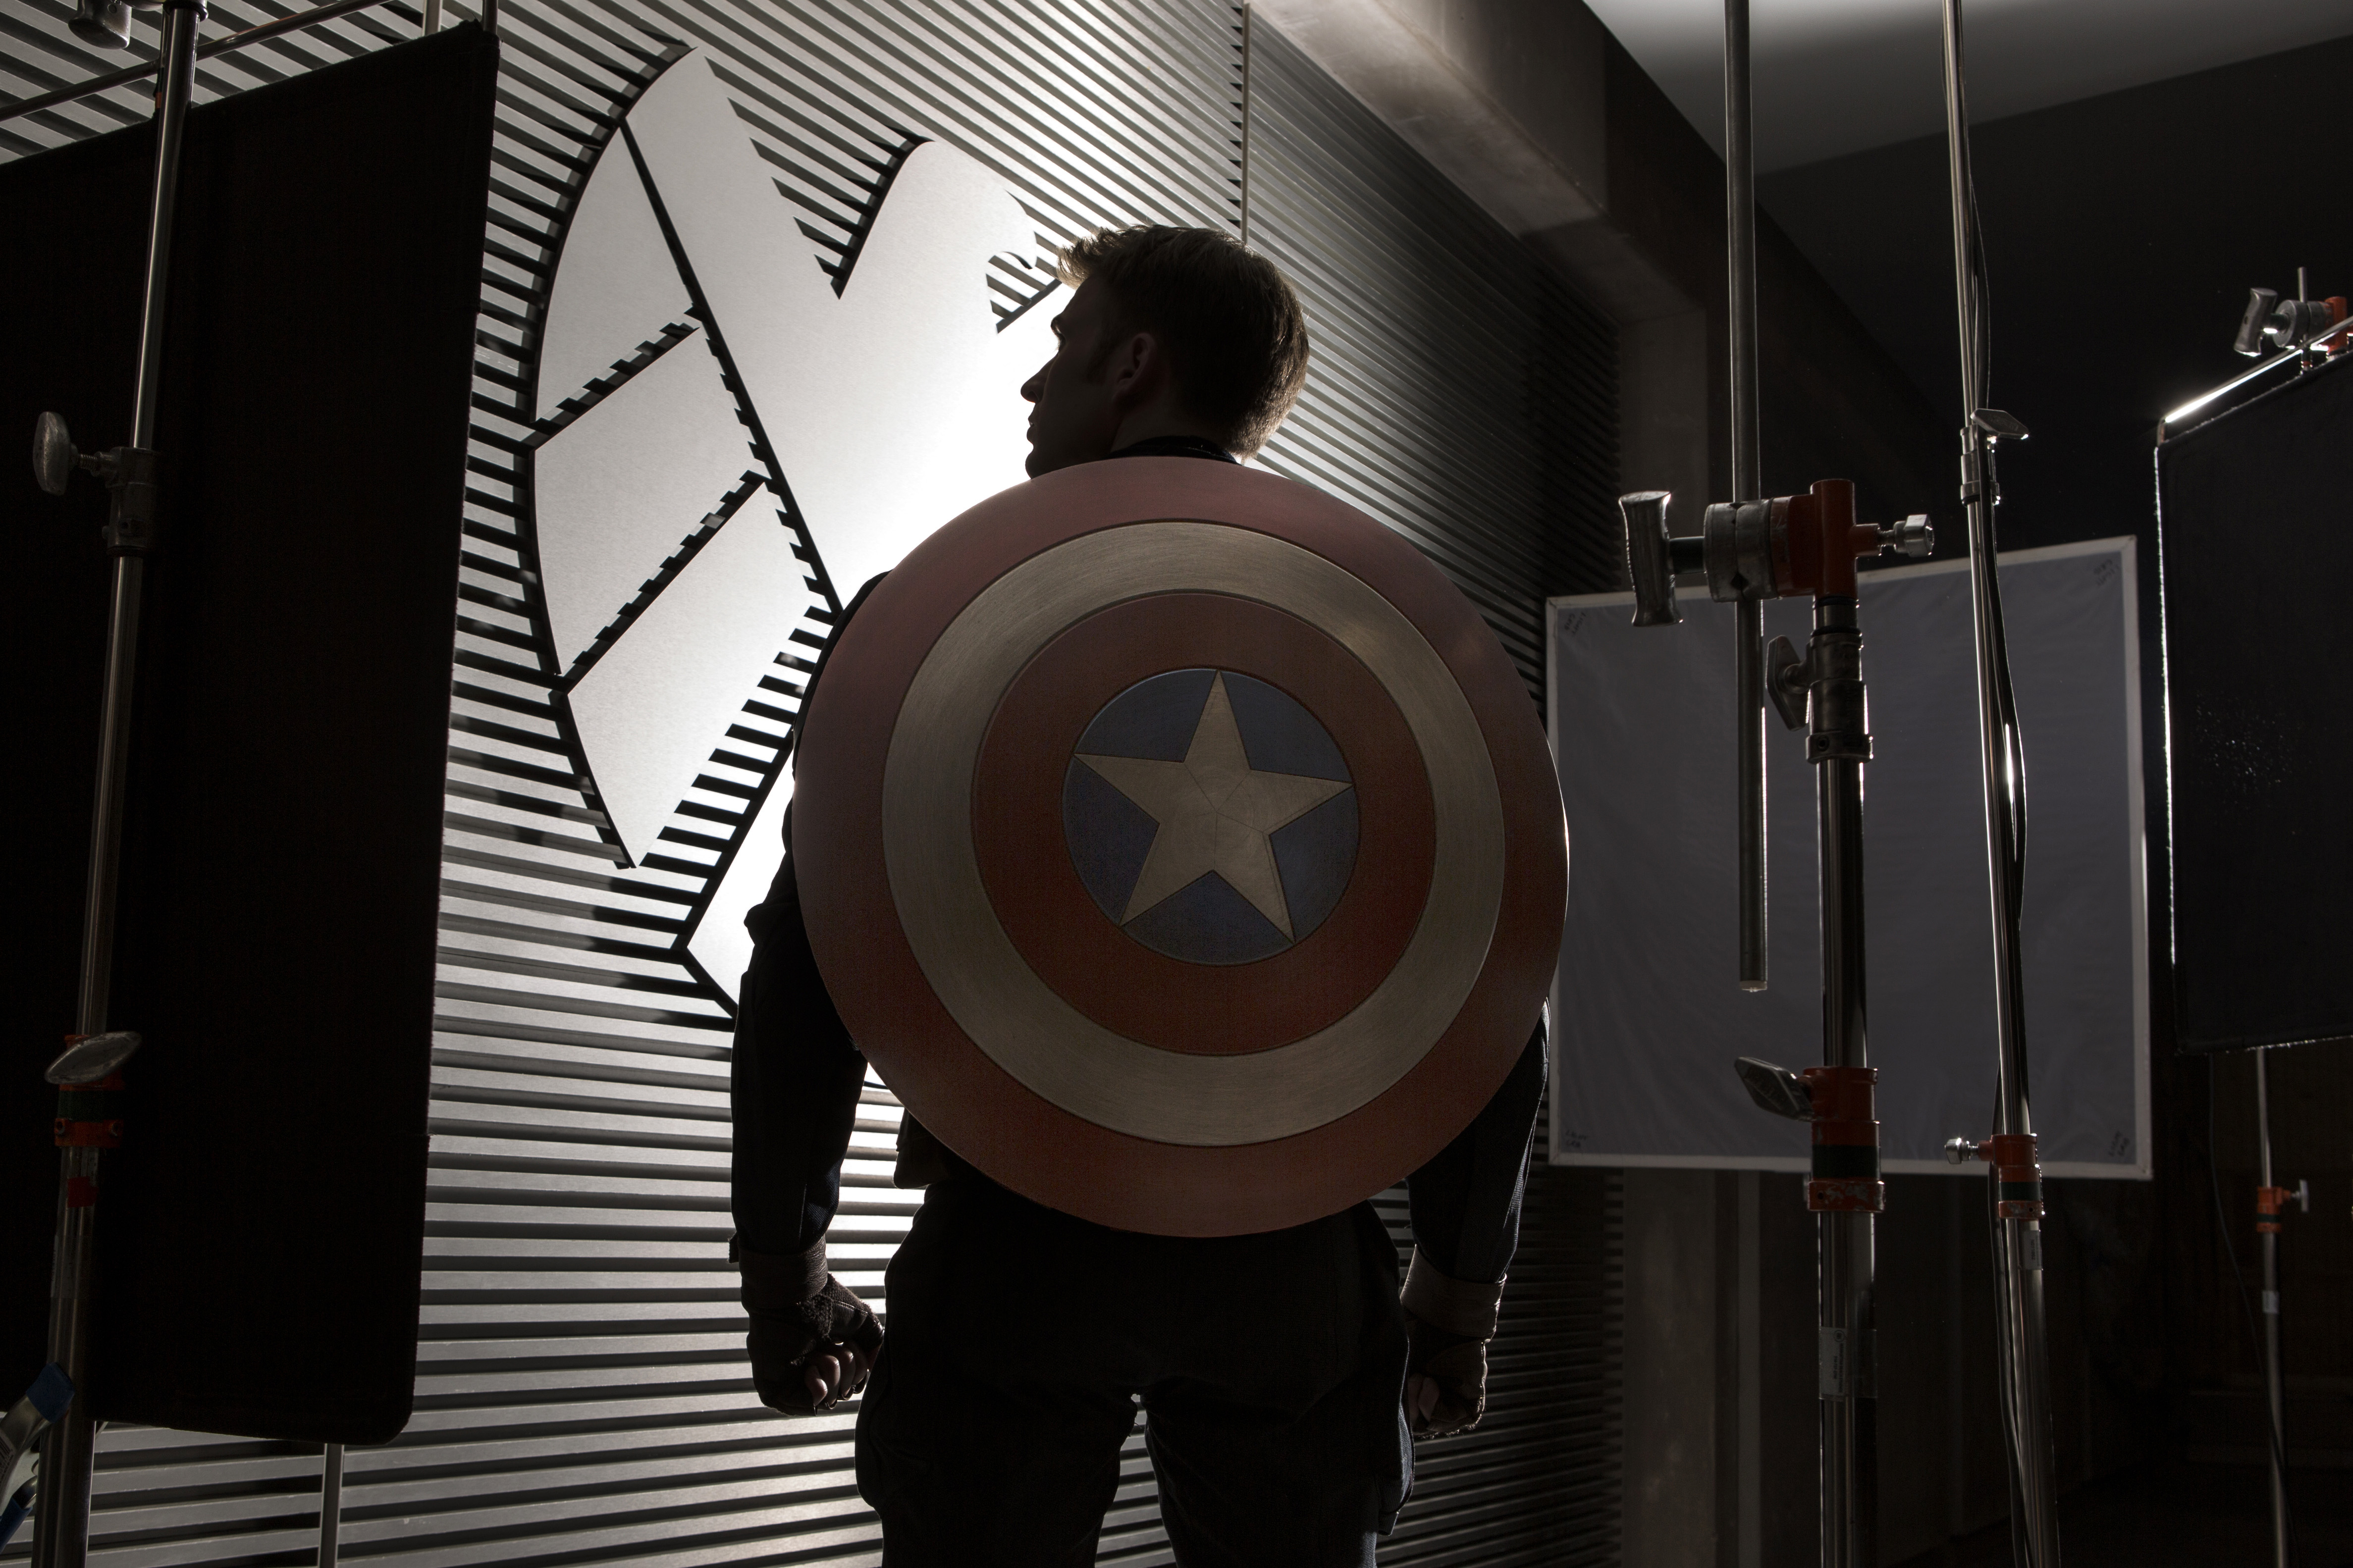 The Winter Soldier’ New Movie Poster Revealed - Captain America Winter Soldier Concept Art - HD Wallpaper 